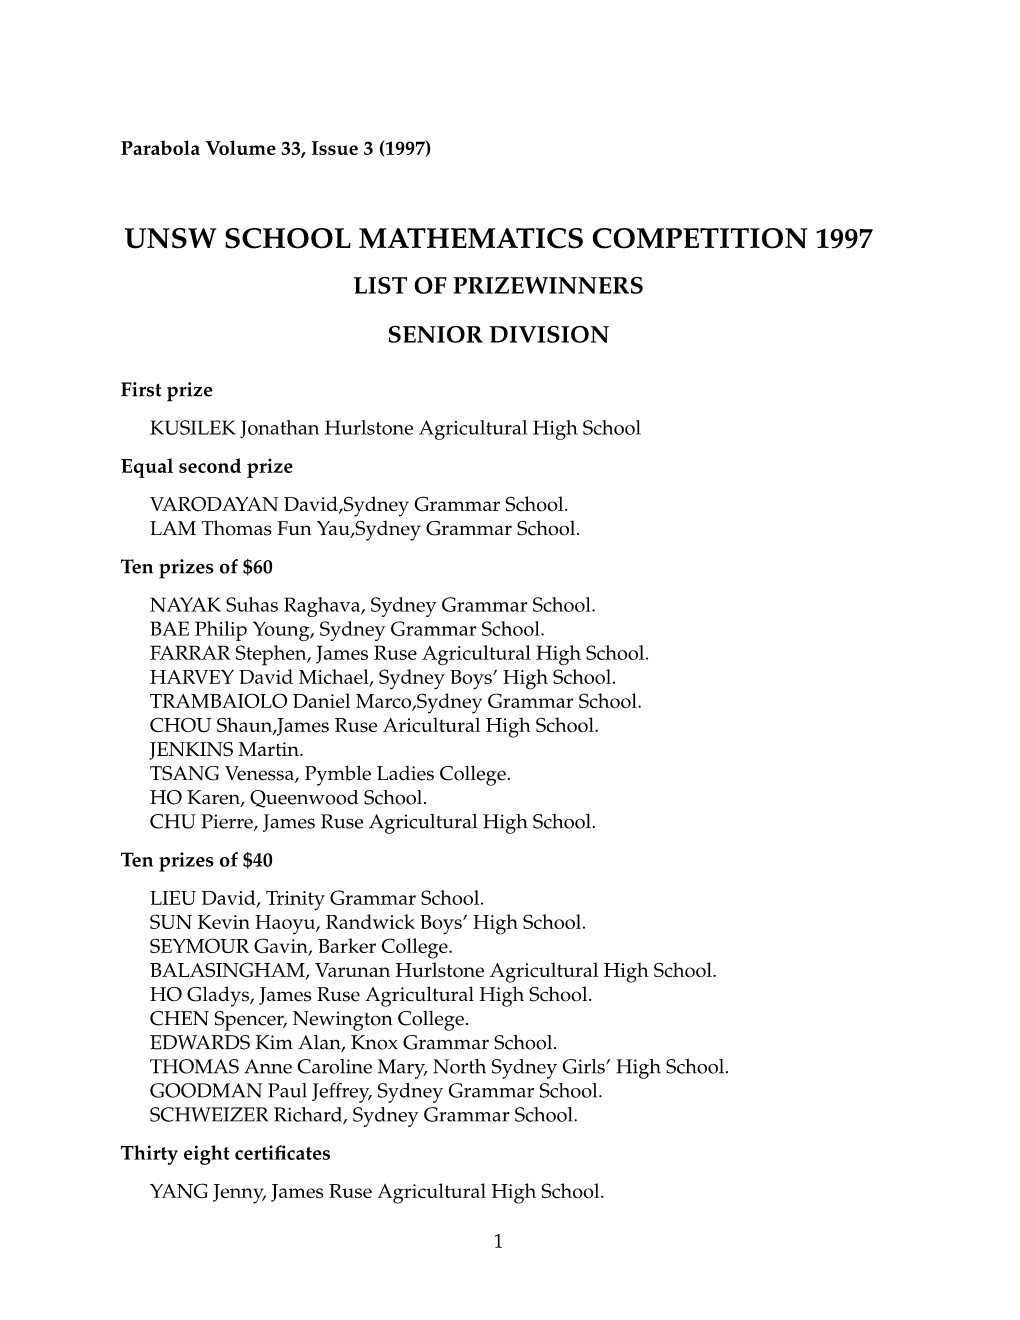 Unsw School Mathematics Competition 1997 List of Prizewinners